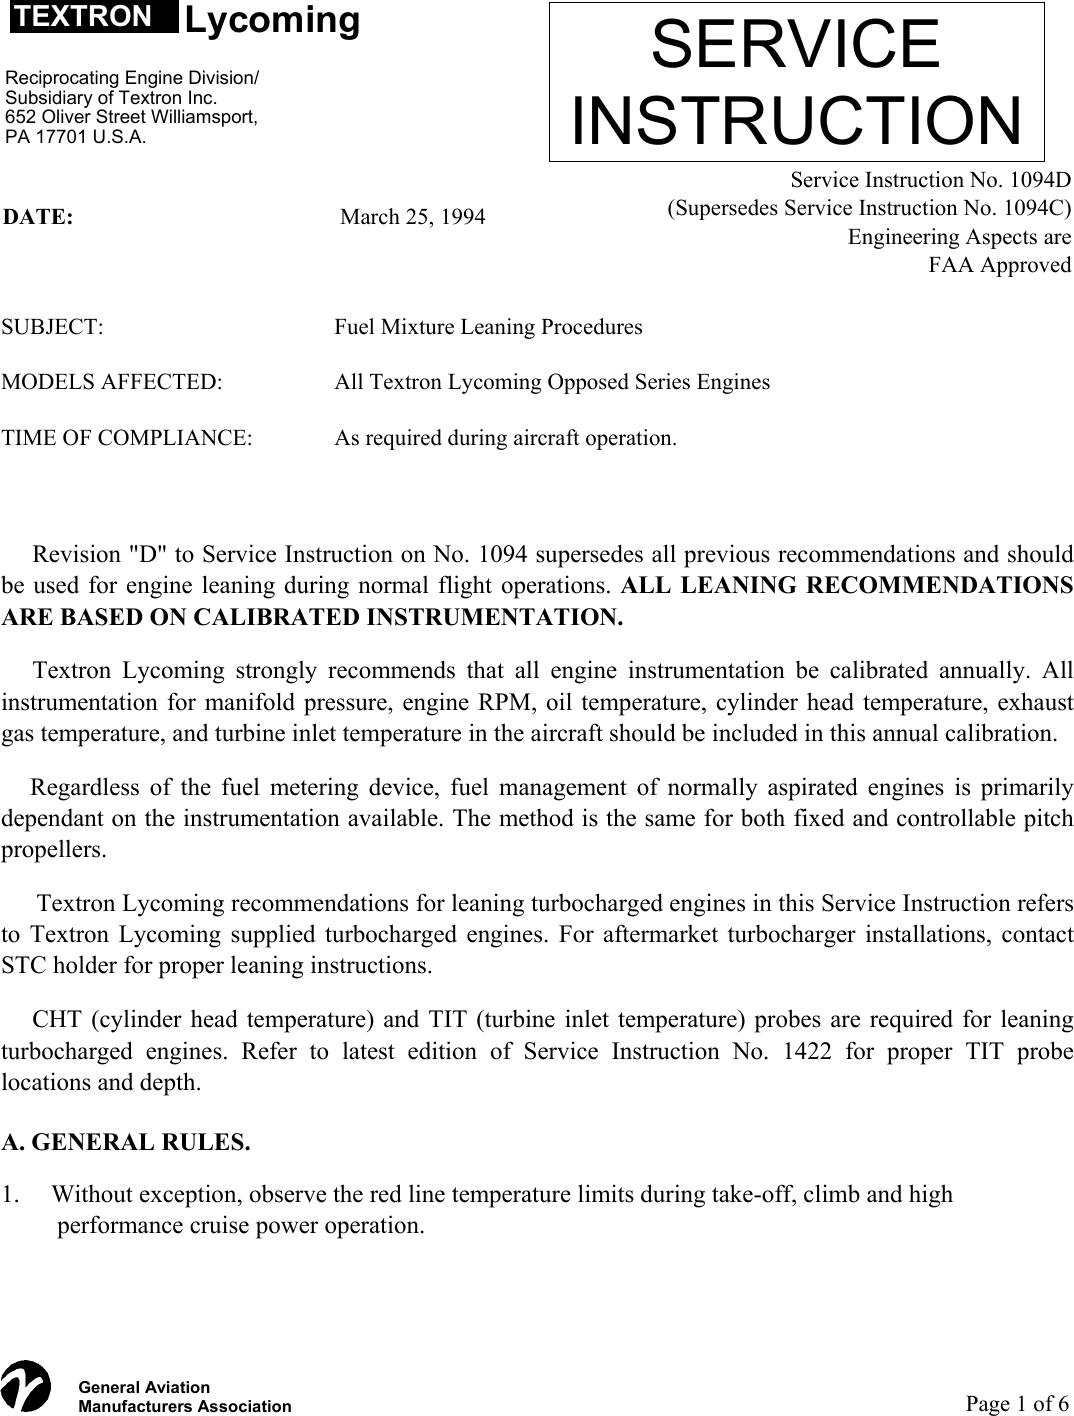 Page 1 of 6 - Lycoming Service Bulletin On Leaning Procedures SI1094D